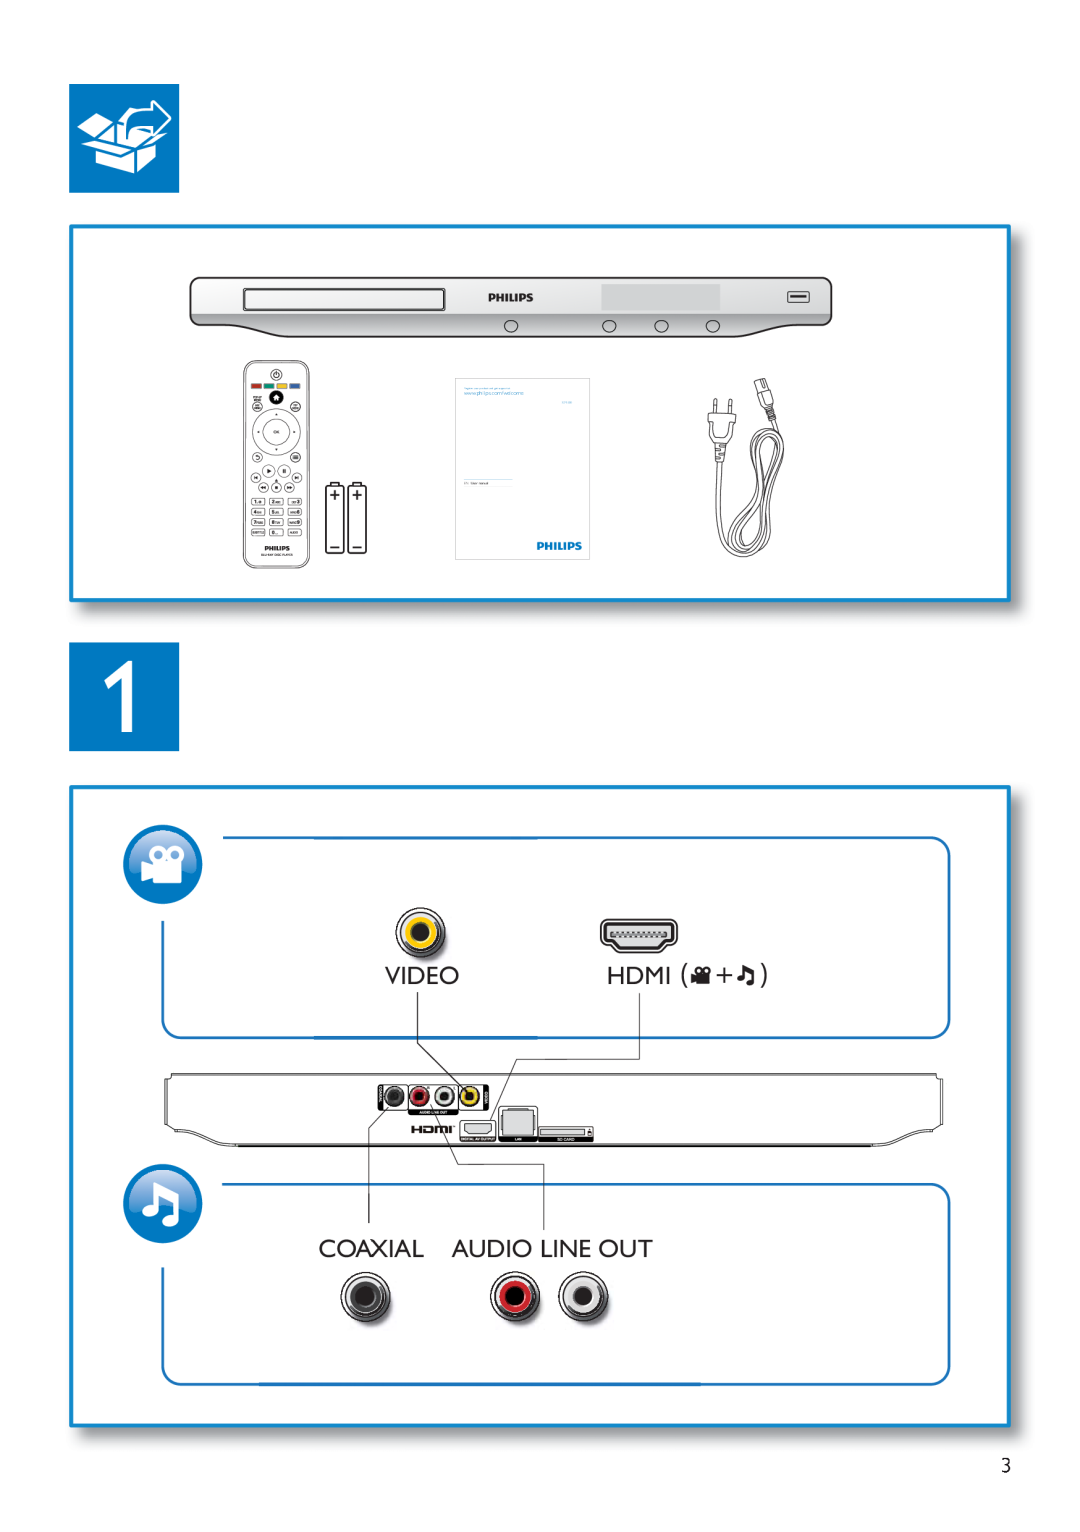 Philips BDP5200 user manual Video Hdmi Coaxial Audio Line Out, EN User manual, Register your product and get support at 